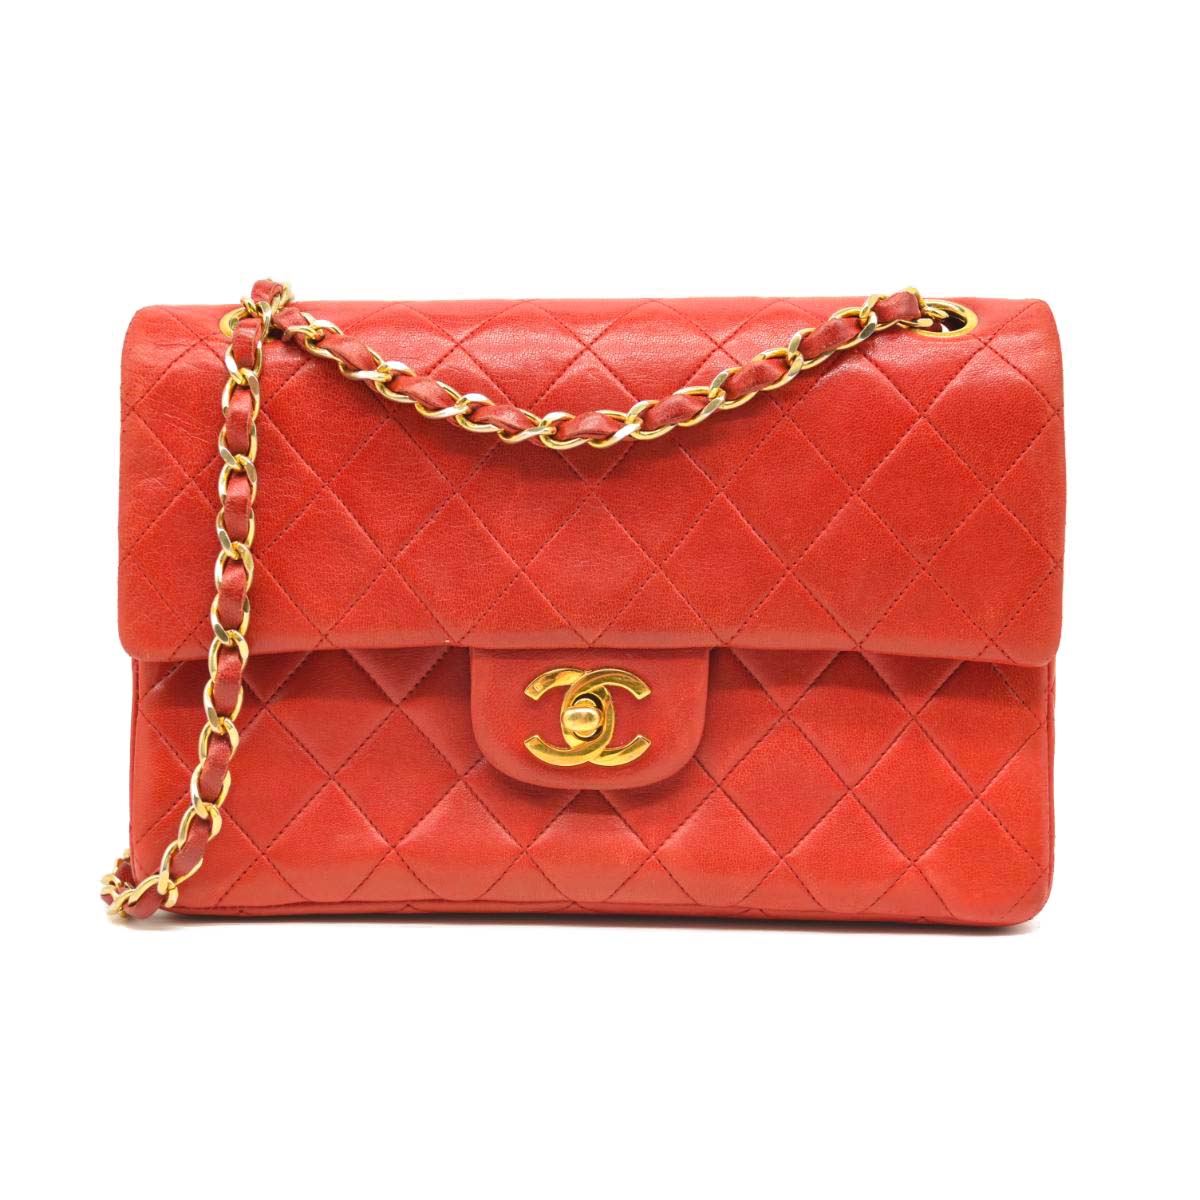 CHANEL Lambskin Quilted Small Double Flap Red